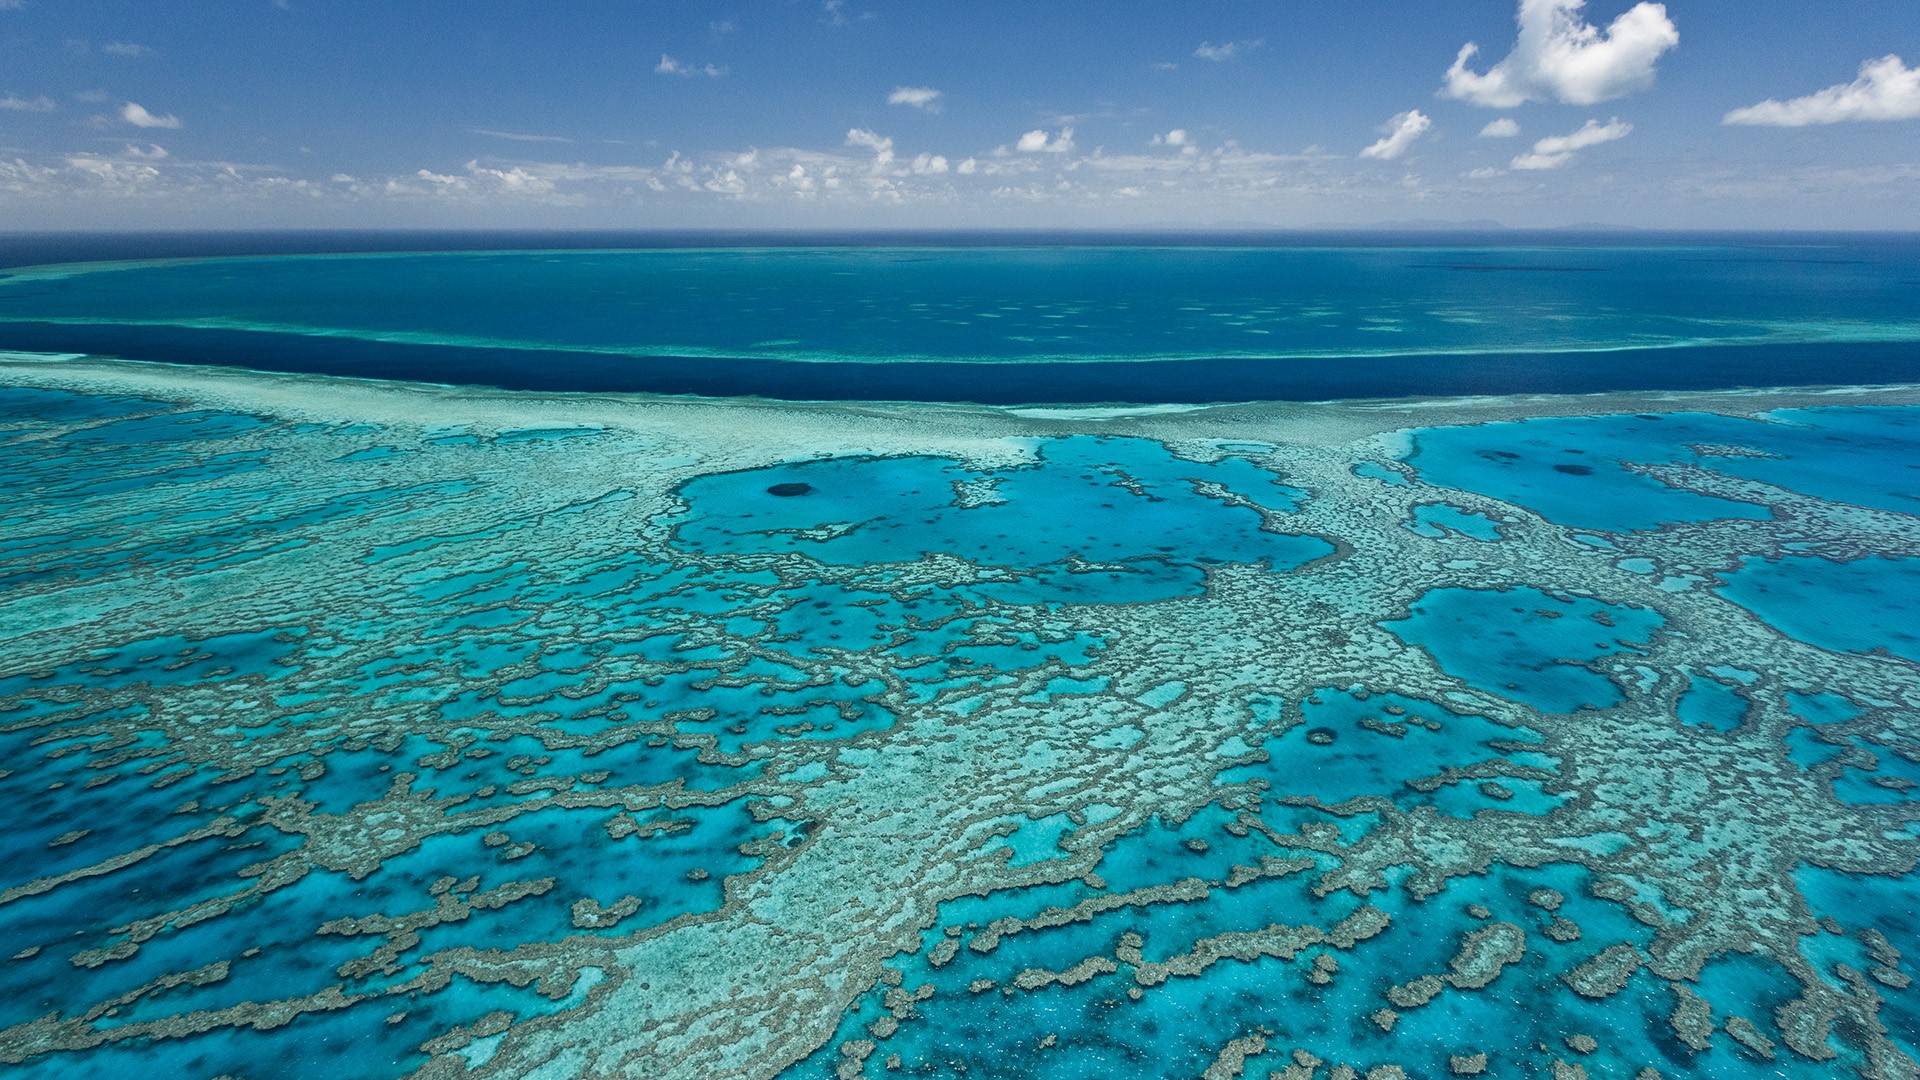 Nature Landscape Far View Horizon Clouds Sky Water Coral Coral Reef Great Barrier Reef Australia 1920x1080